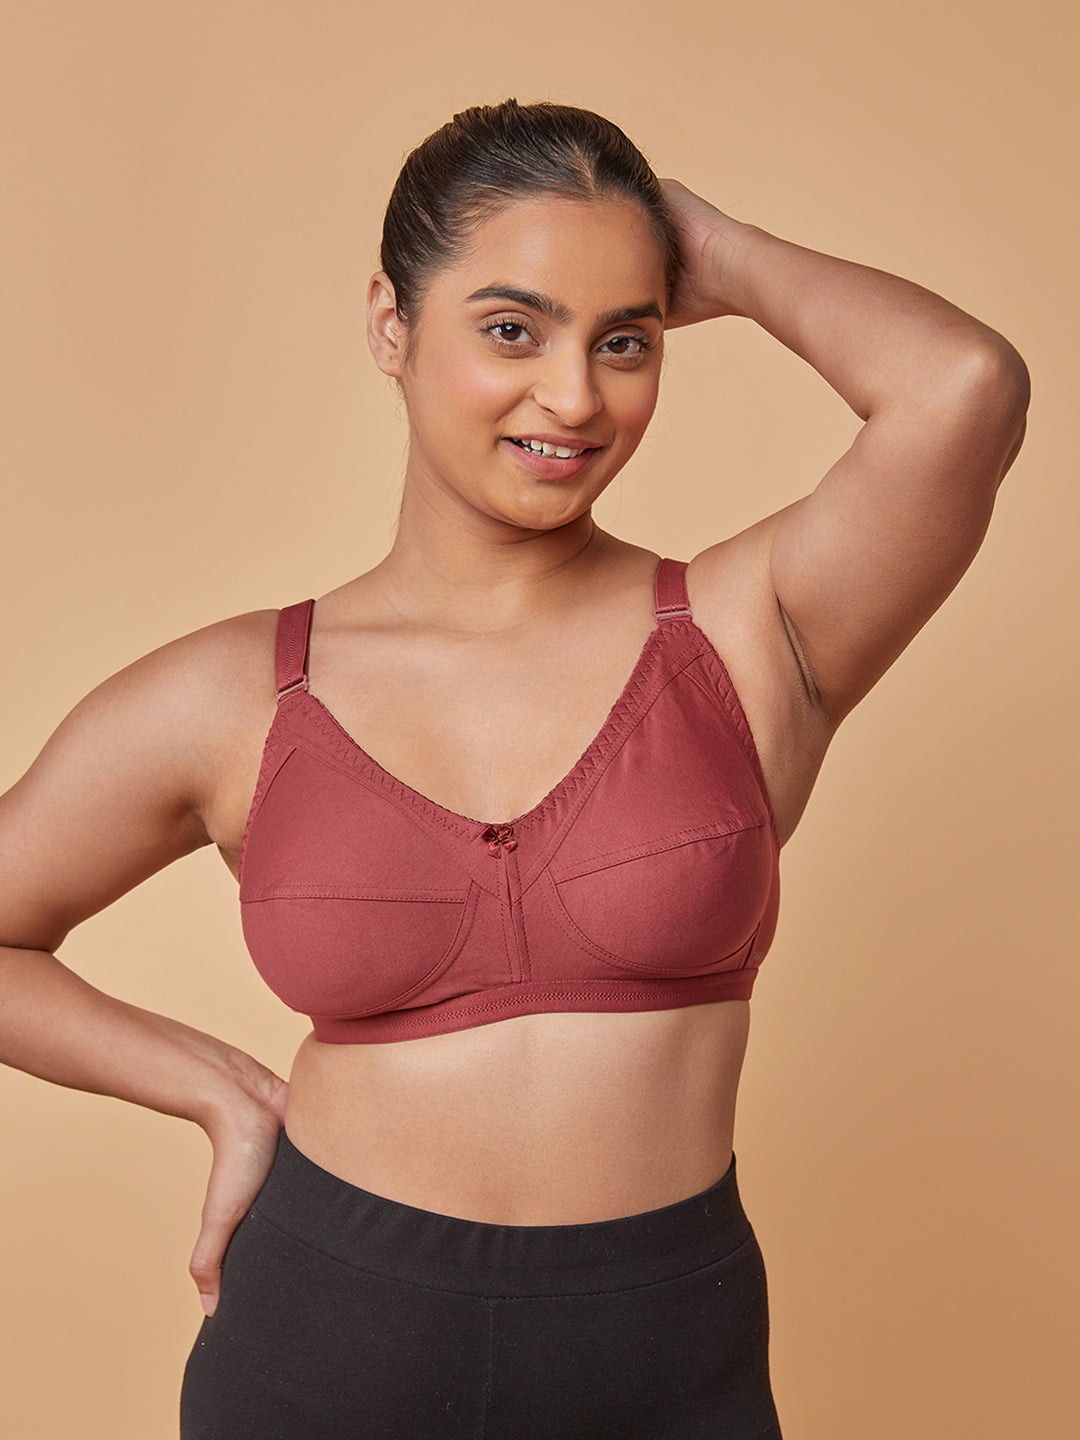 maashie M4408 Cotton Non-Padded Non-Wired Everyday Bra, Fawn 44C